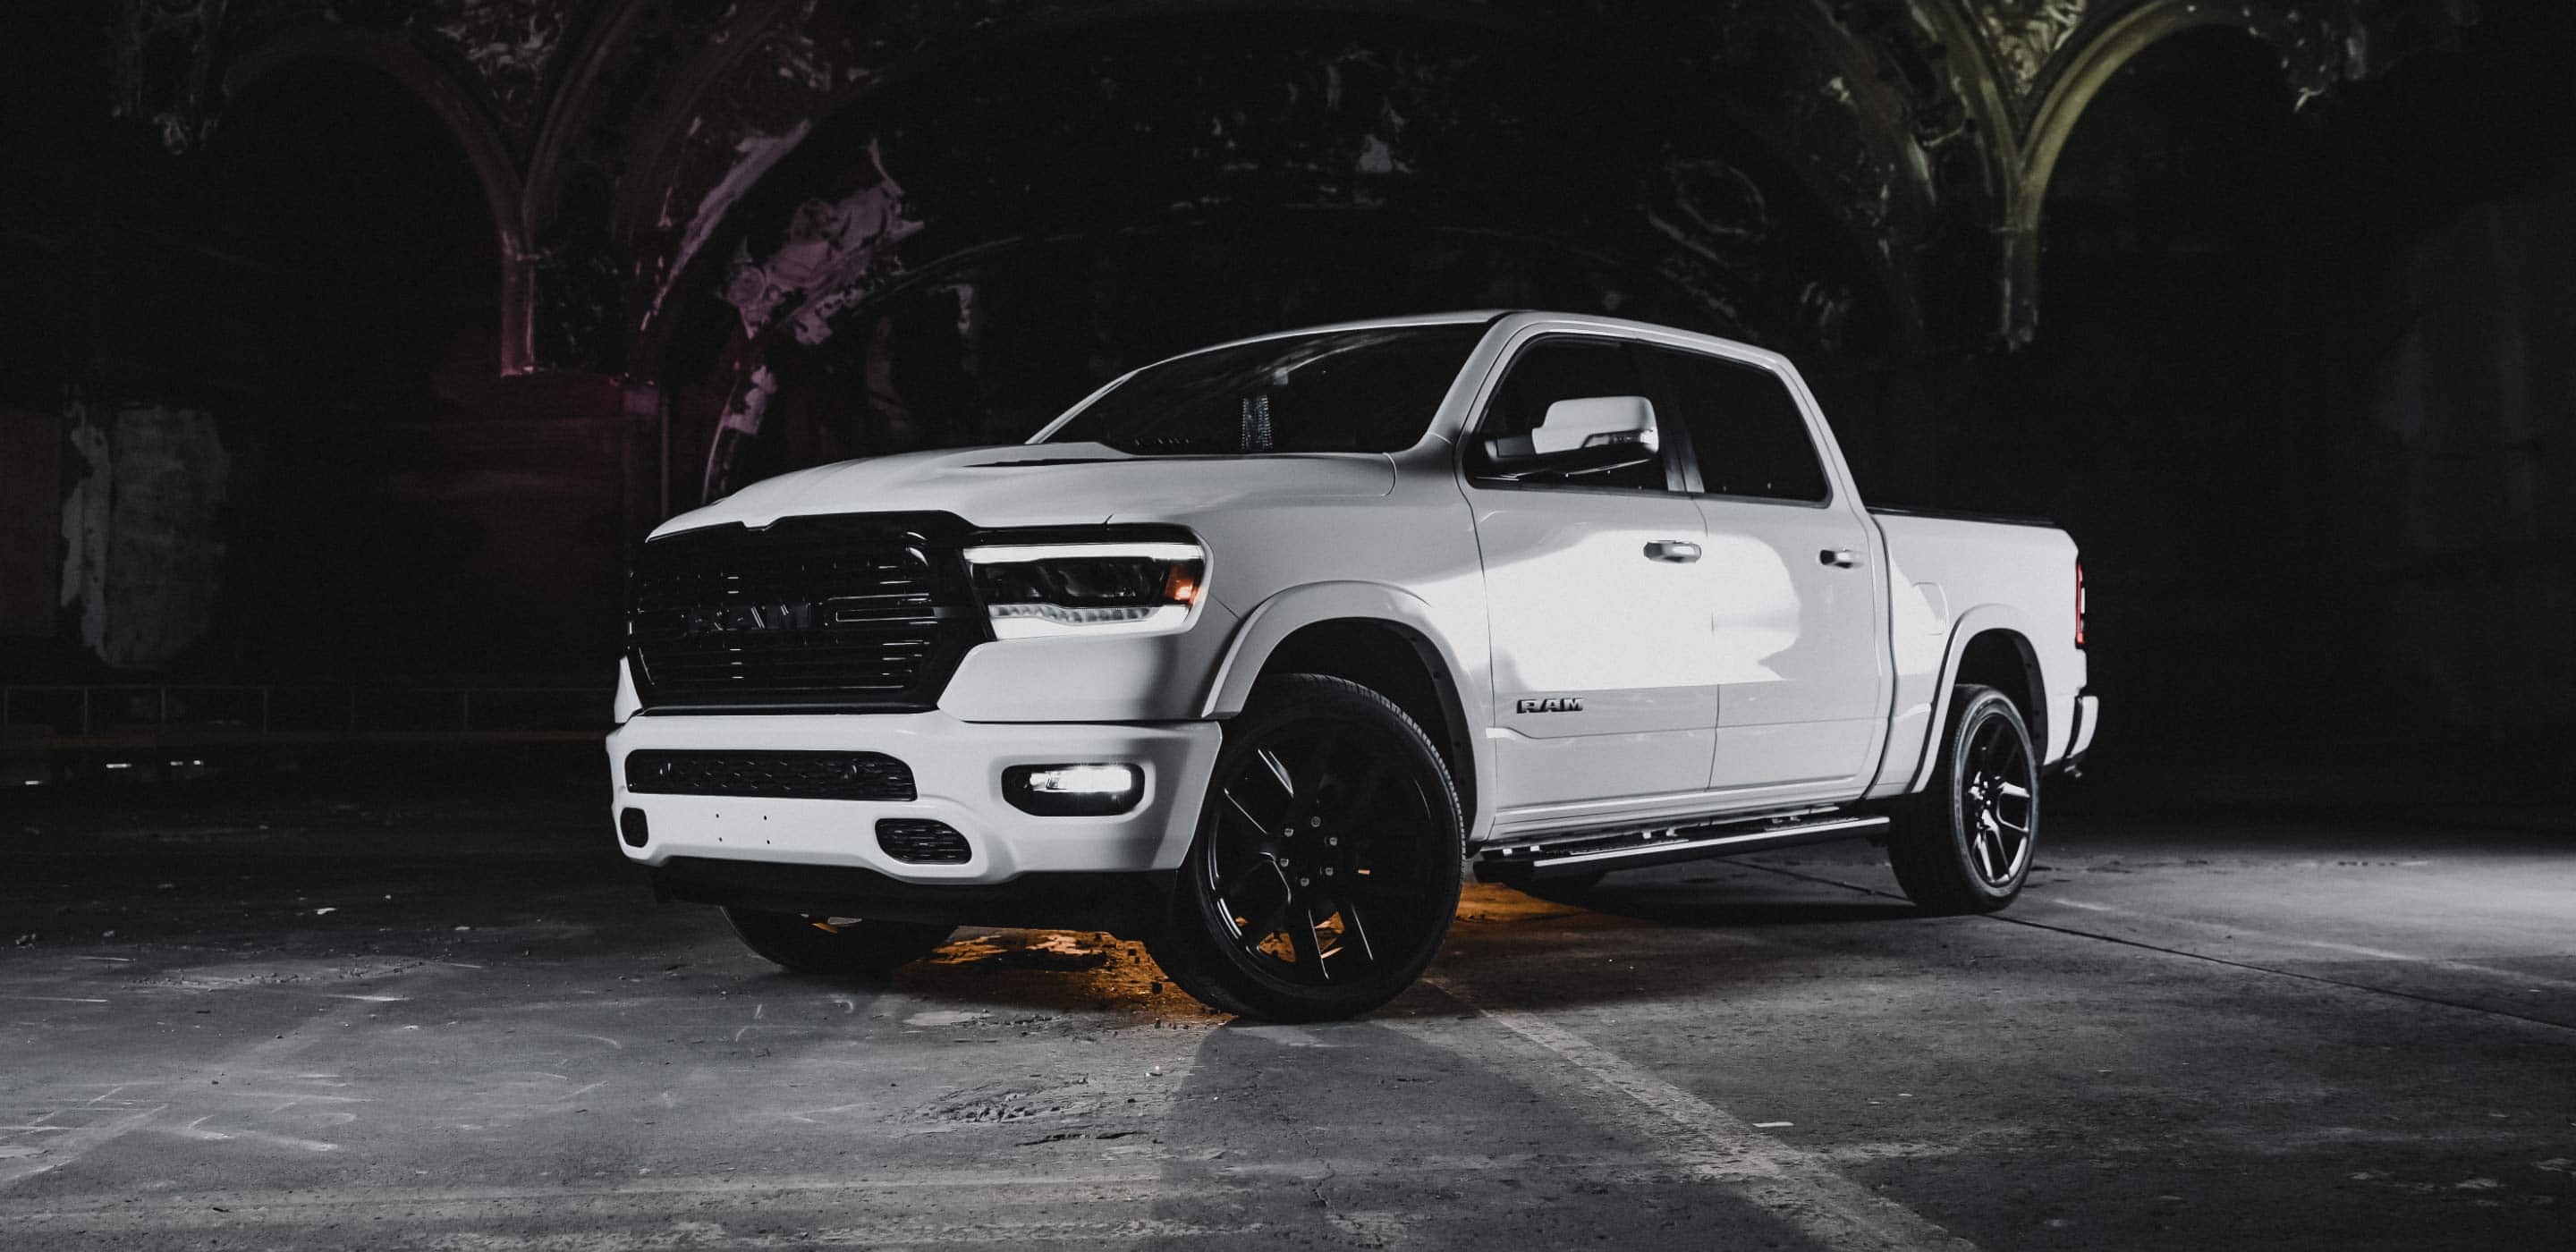 Top Accessories For Your 2020 Ram 1500